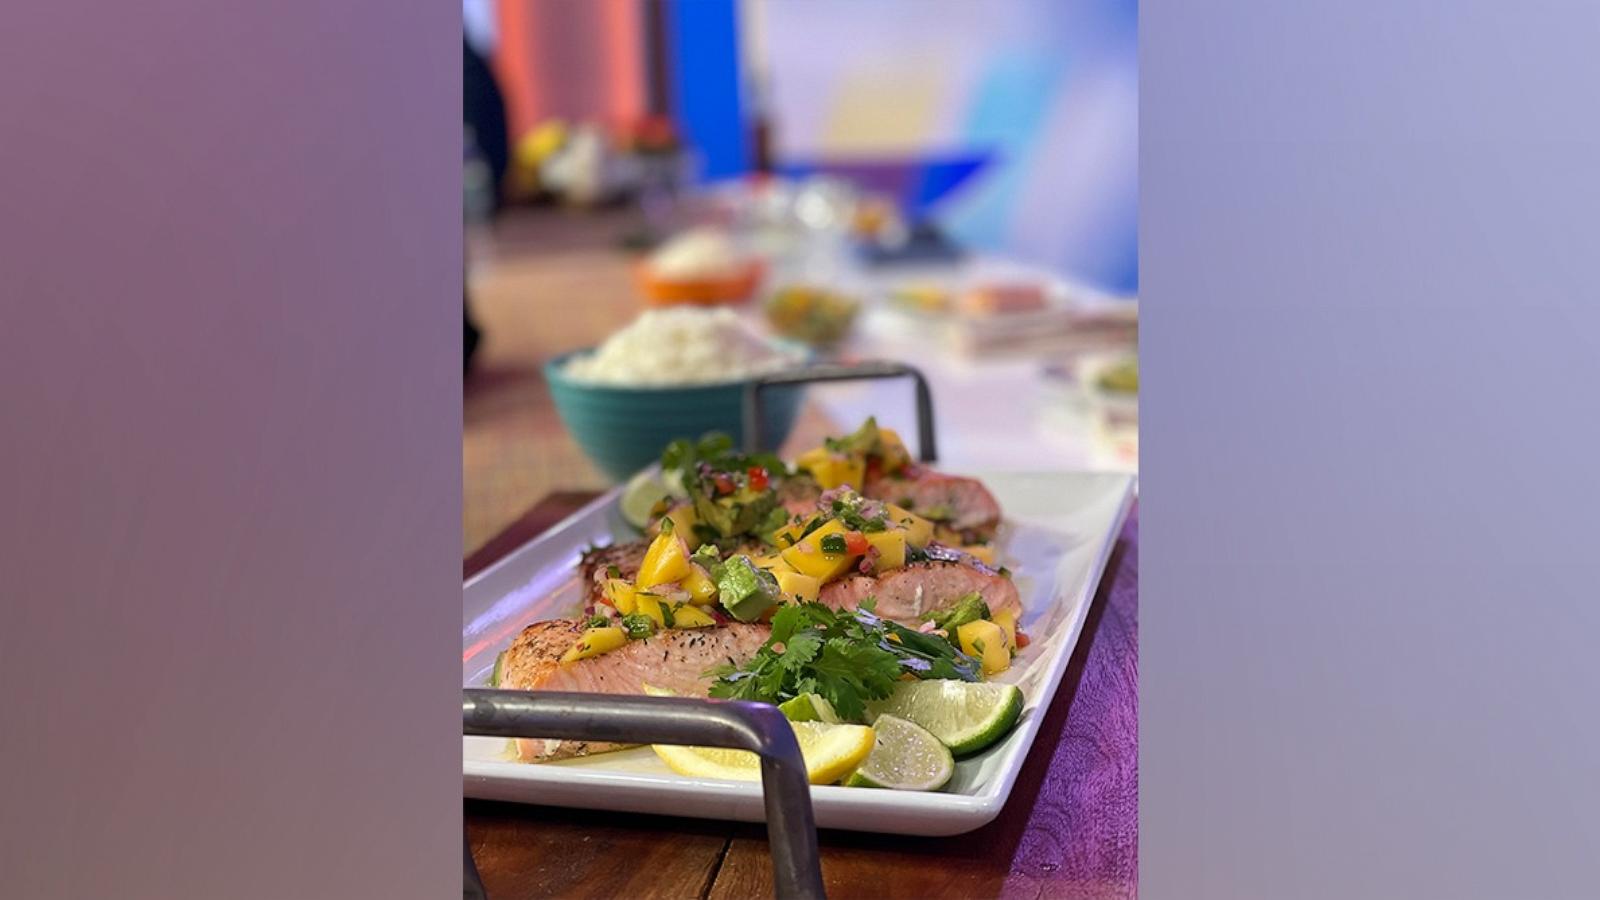 PHOTO: Carnie Wilson drops by to cook up some salmon with mango avocado salsa and rice.